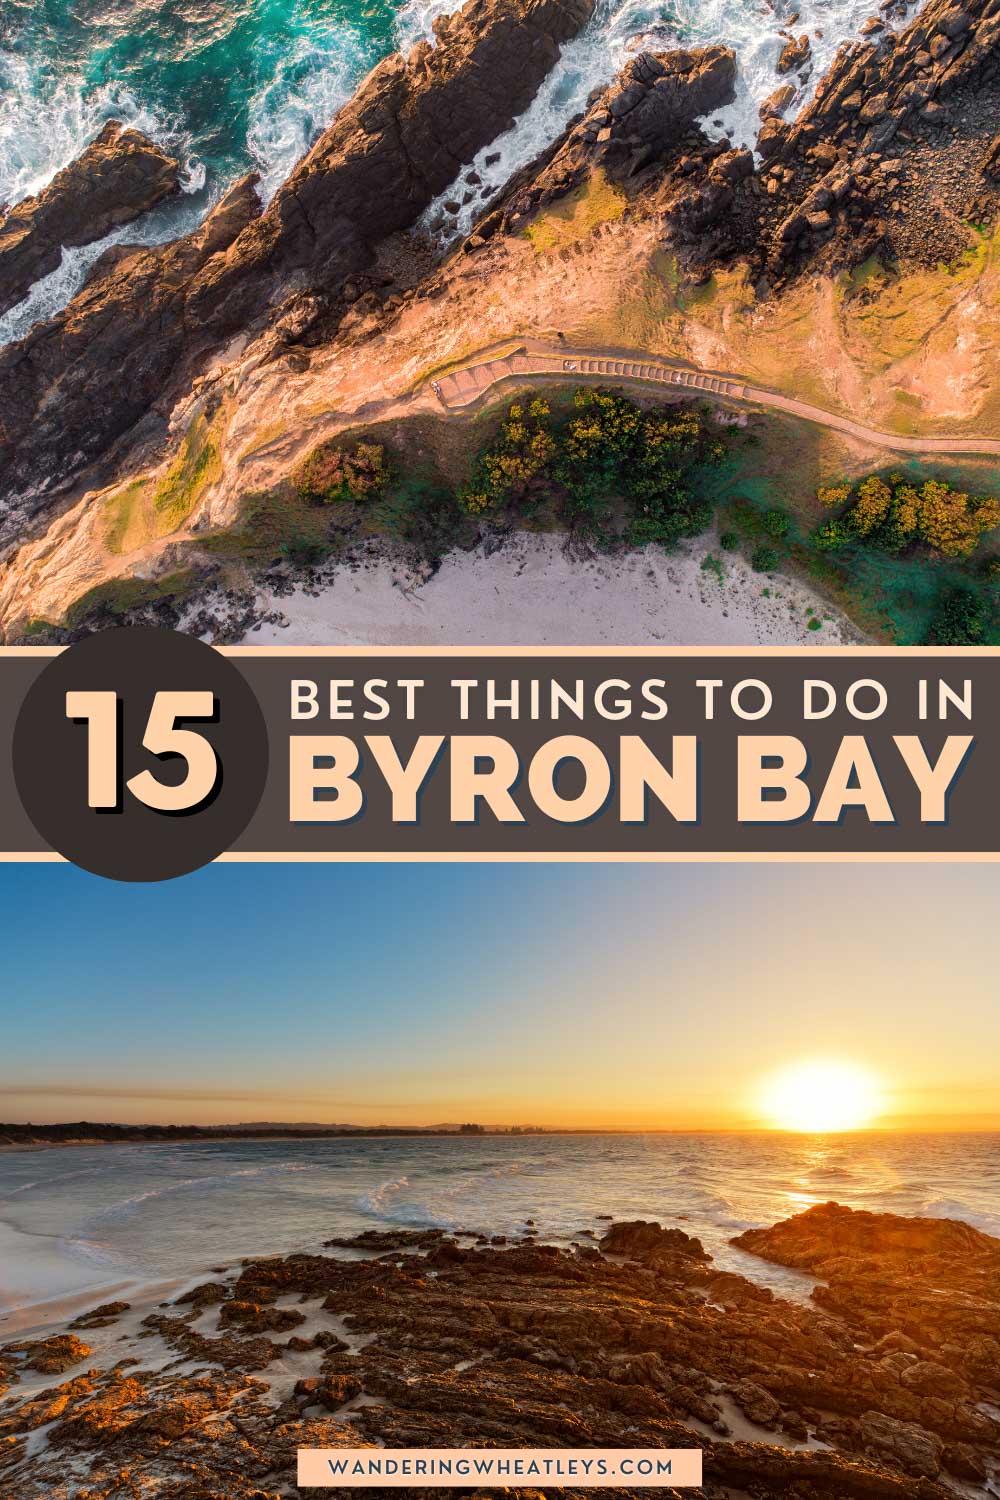 Best Things to do in Byron Bay